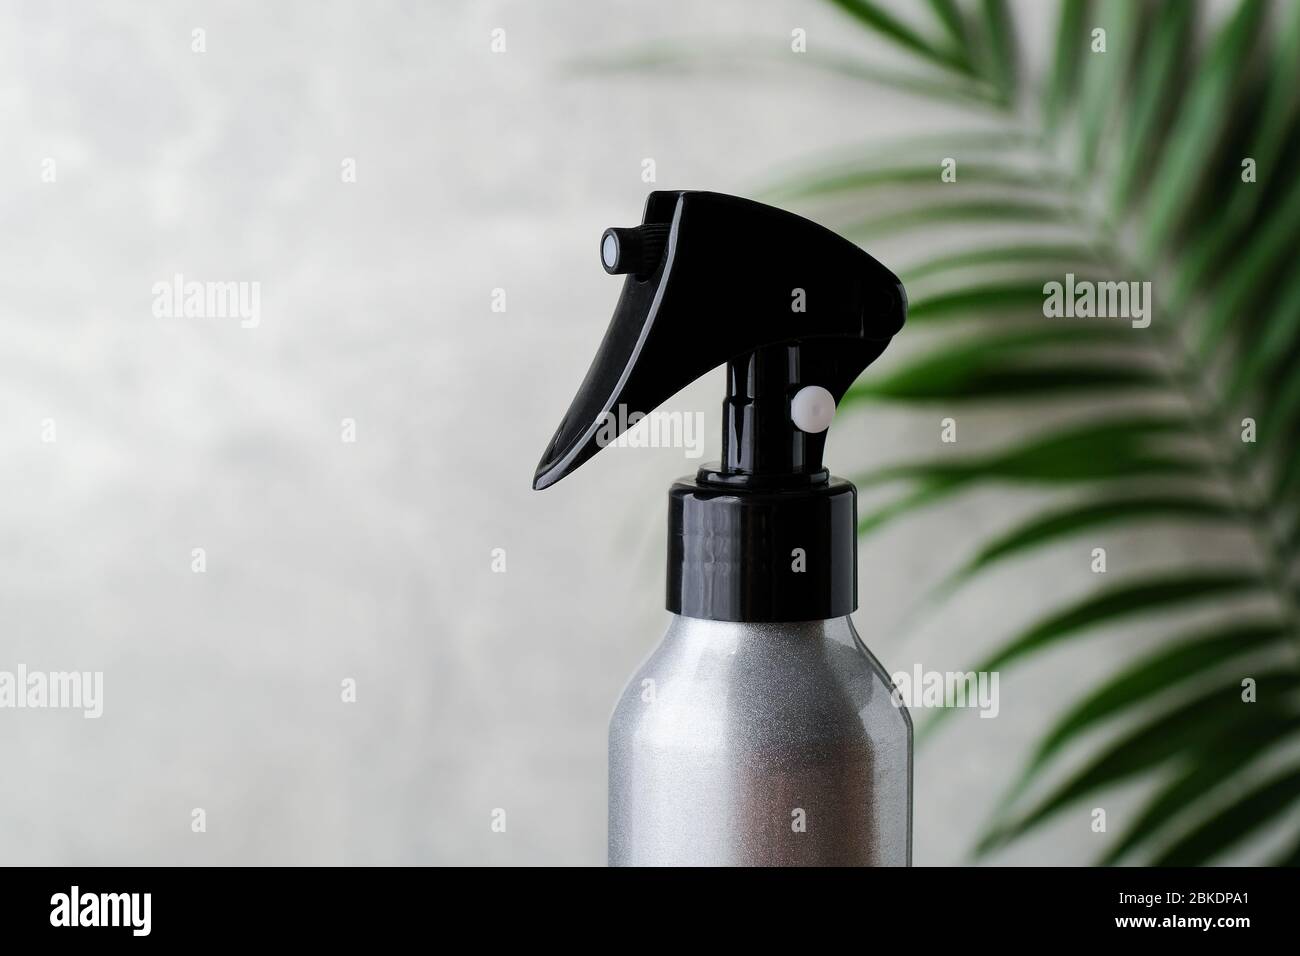 Download Silver Cosmetic Trigger Sprayer Bottle Mockup Close Up View Stock Photo Alamy PSD Mockup Templates